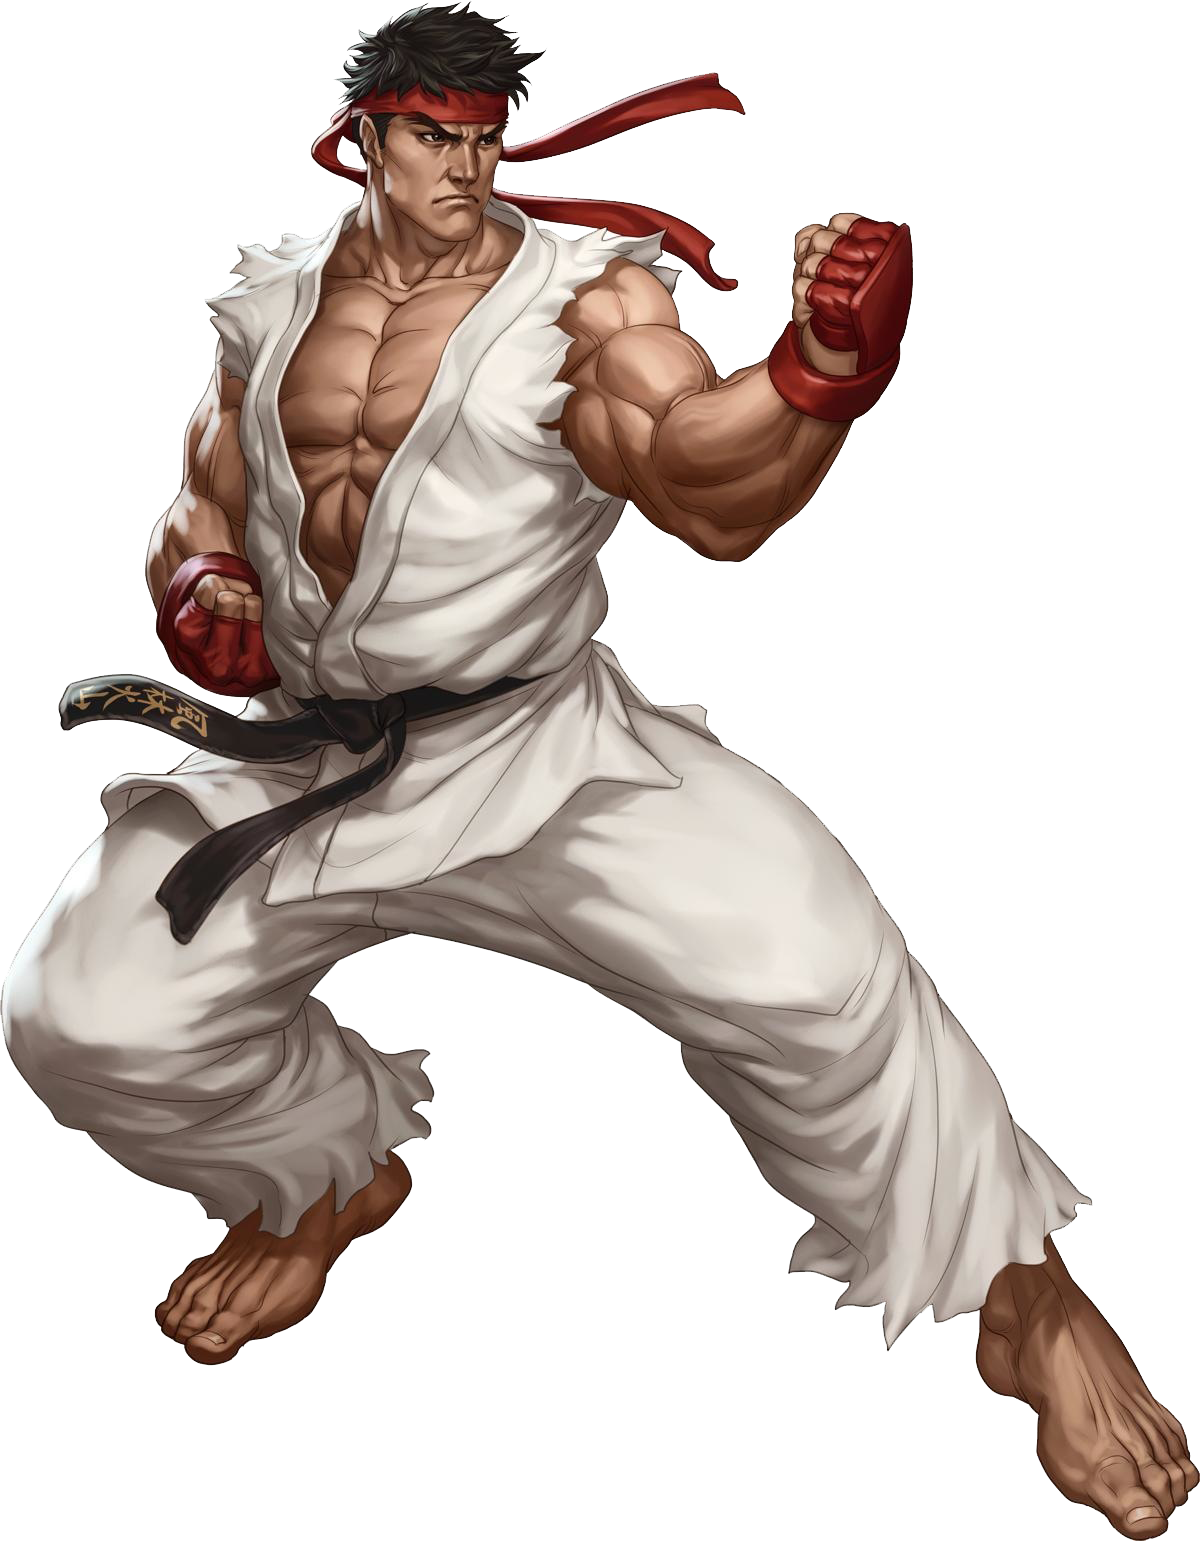 Warrior Art Fighter 3Rd Character Fictional Ii PNG Image